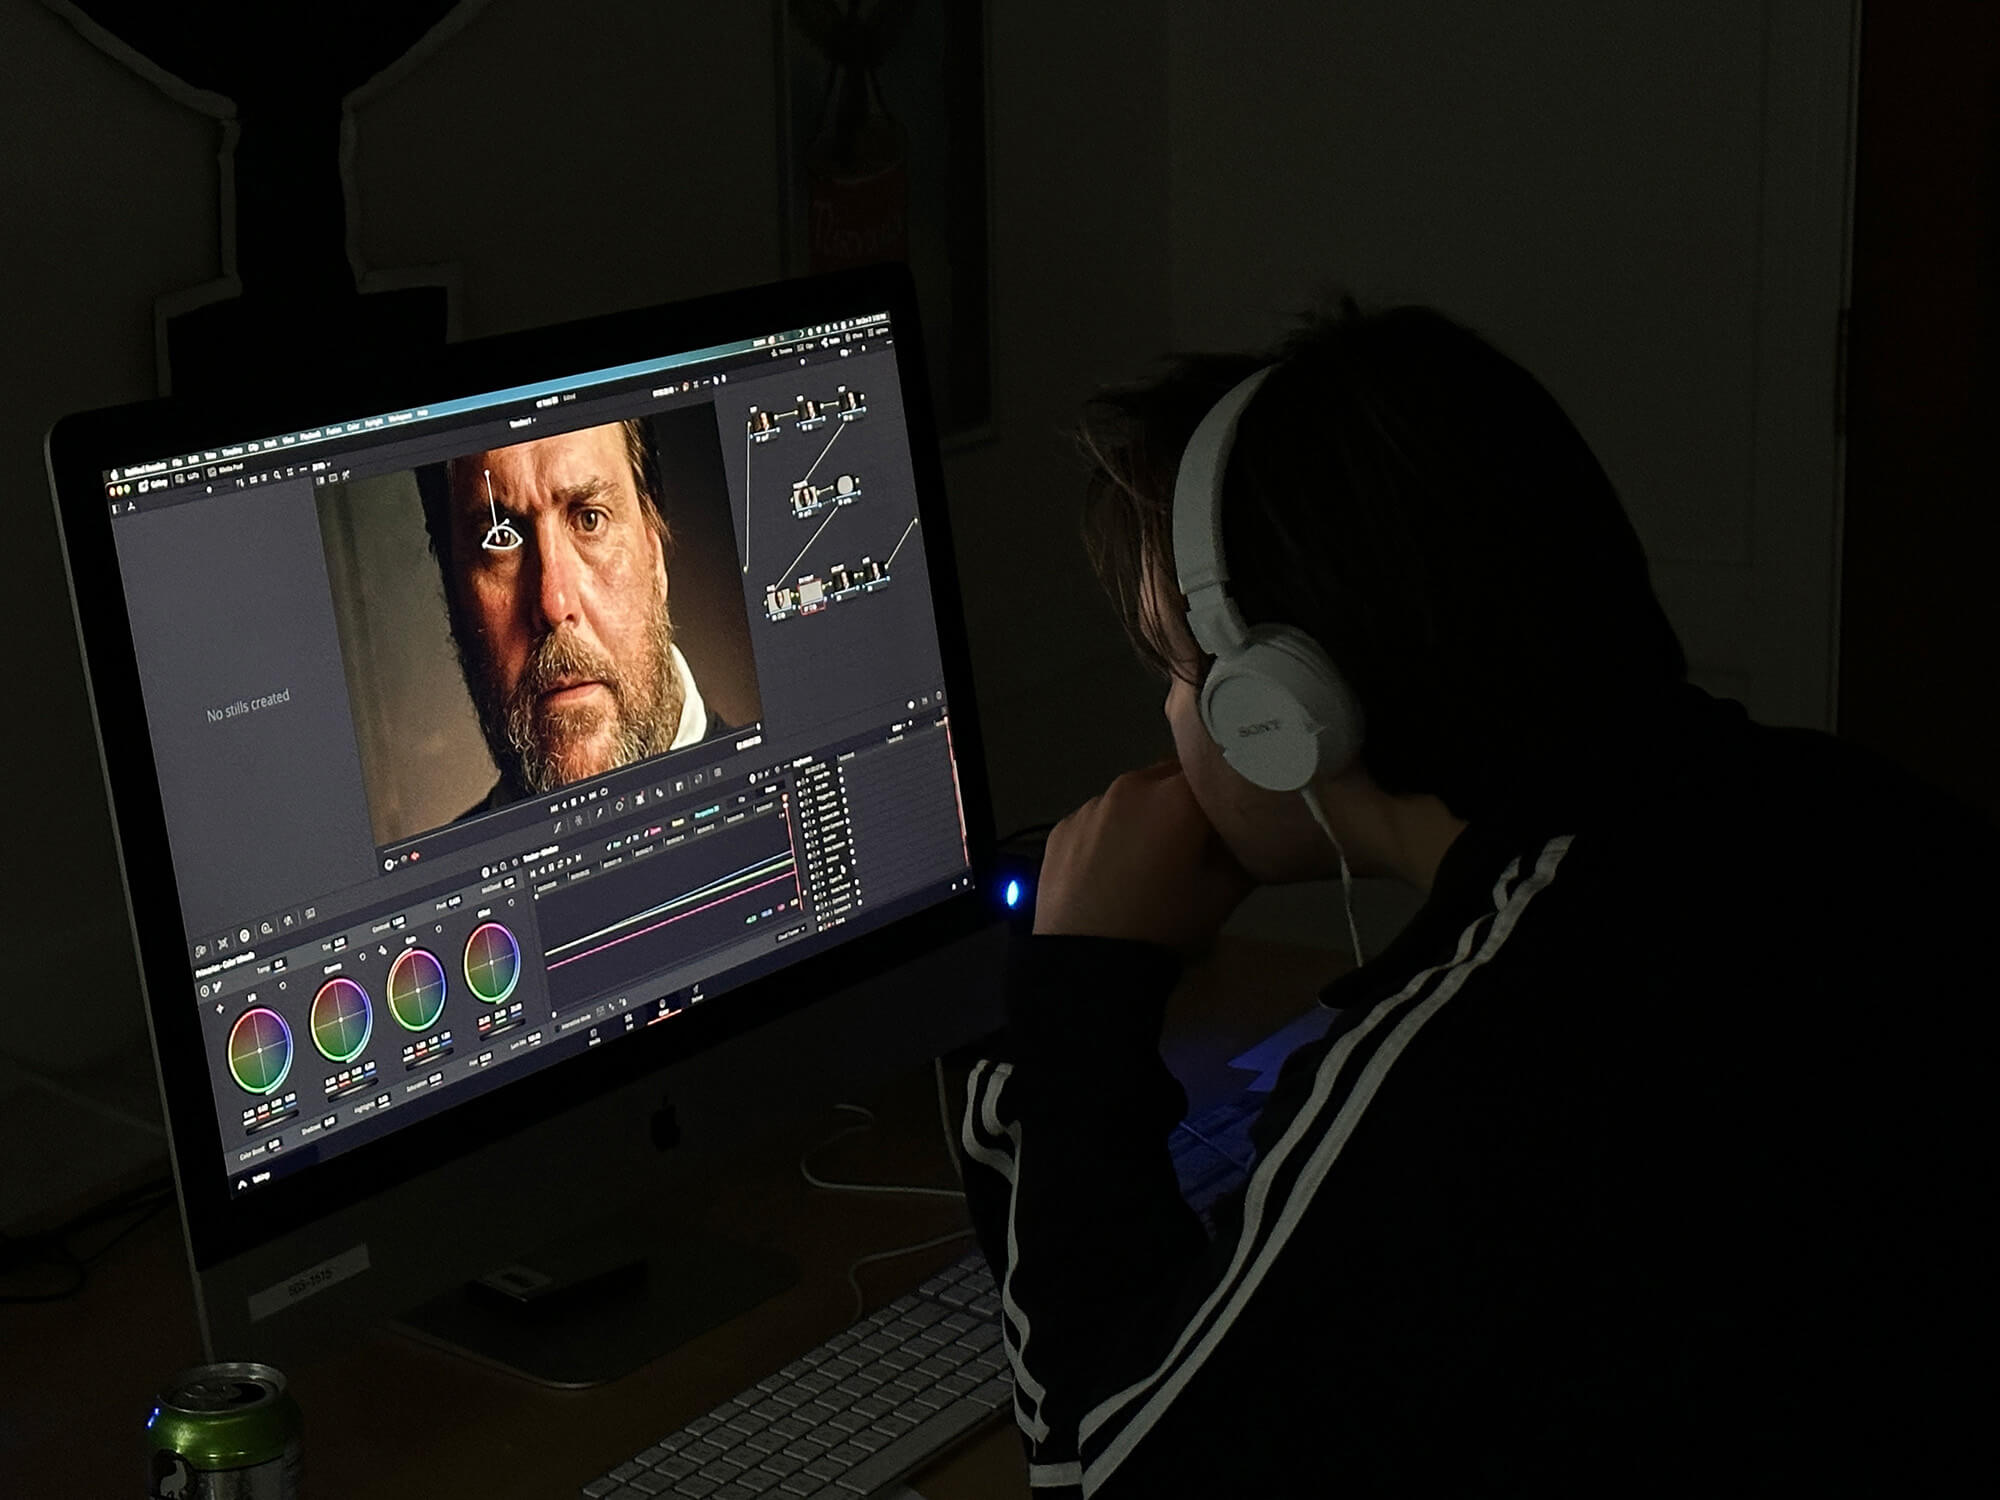 Student learning DaVinci Resolve online in real time